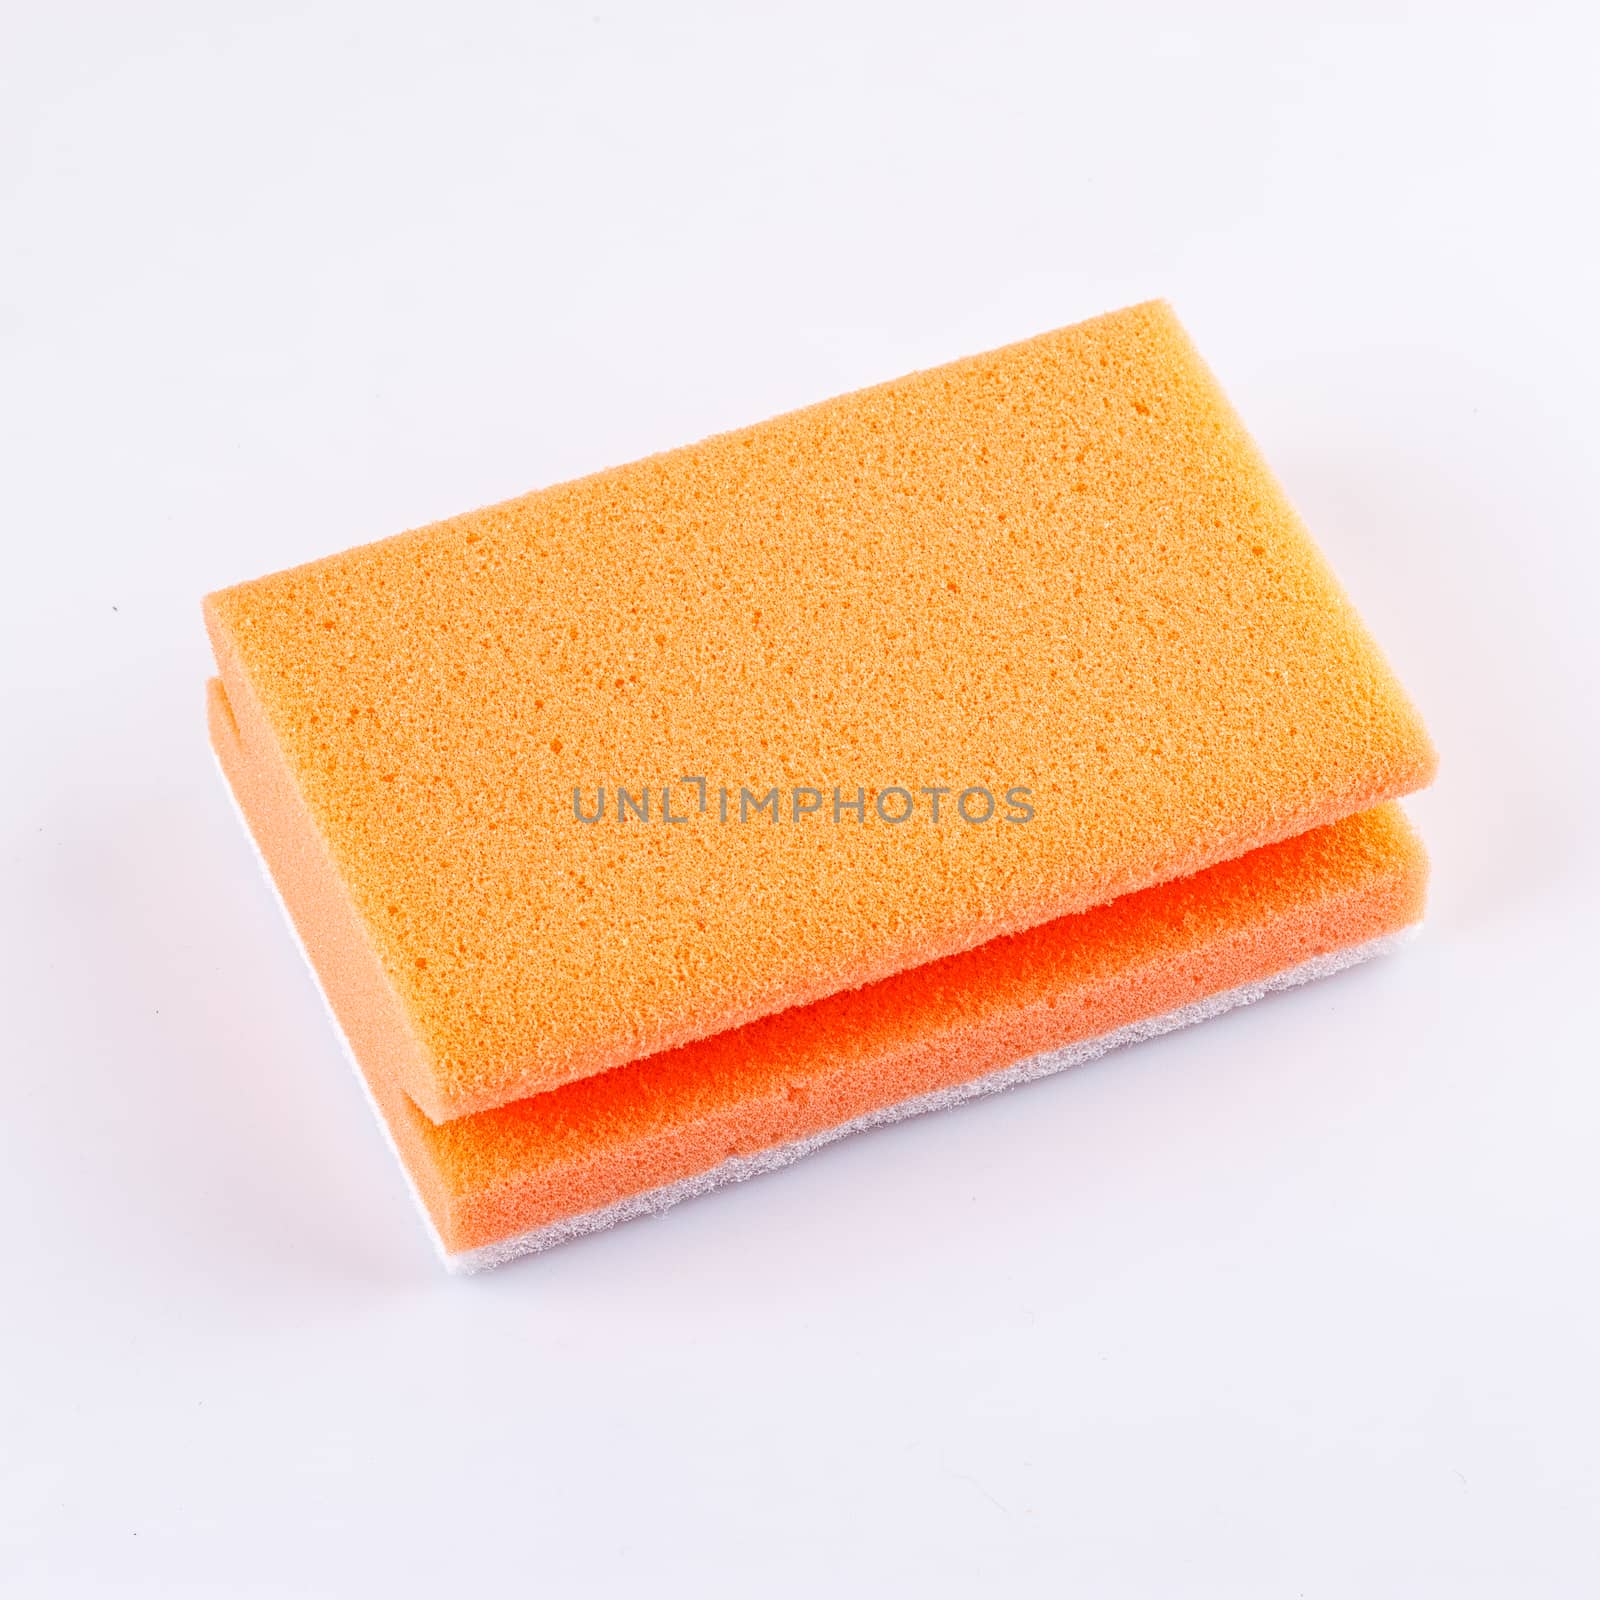 colored sponges close up cleaners, detergents, household cleaning sponge for cleaning on white background